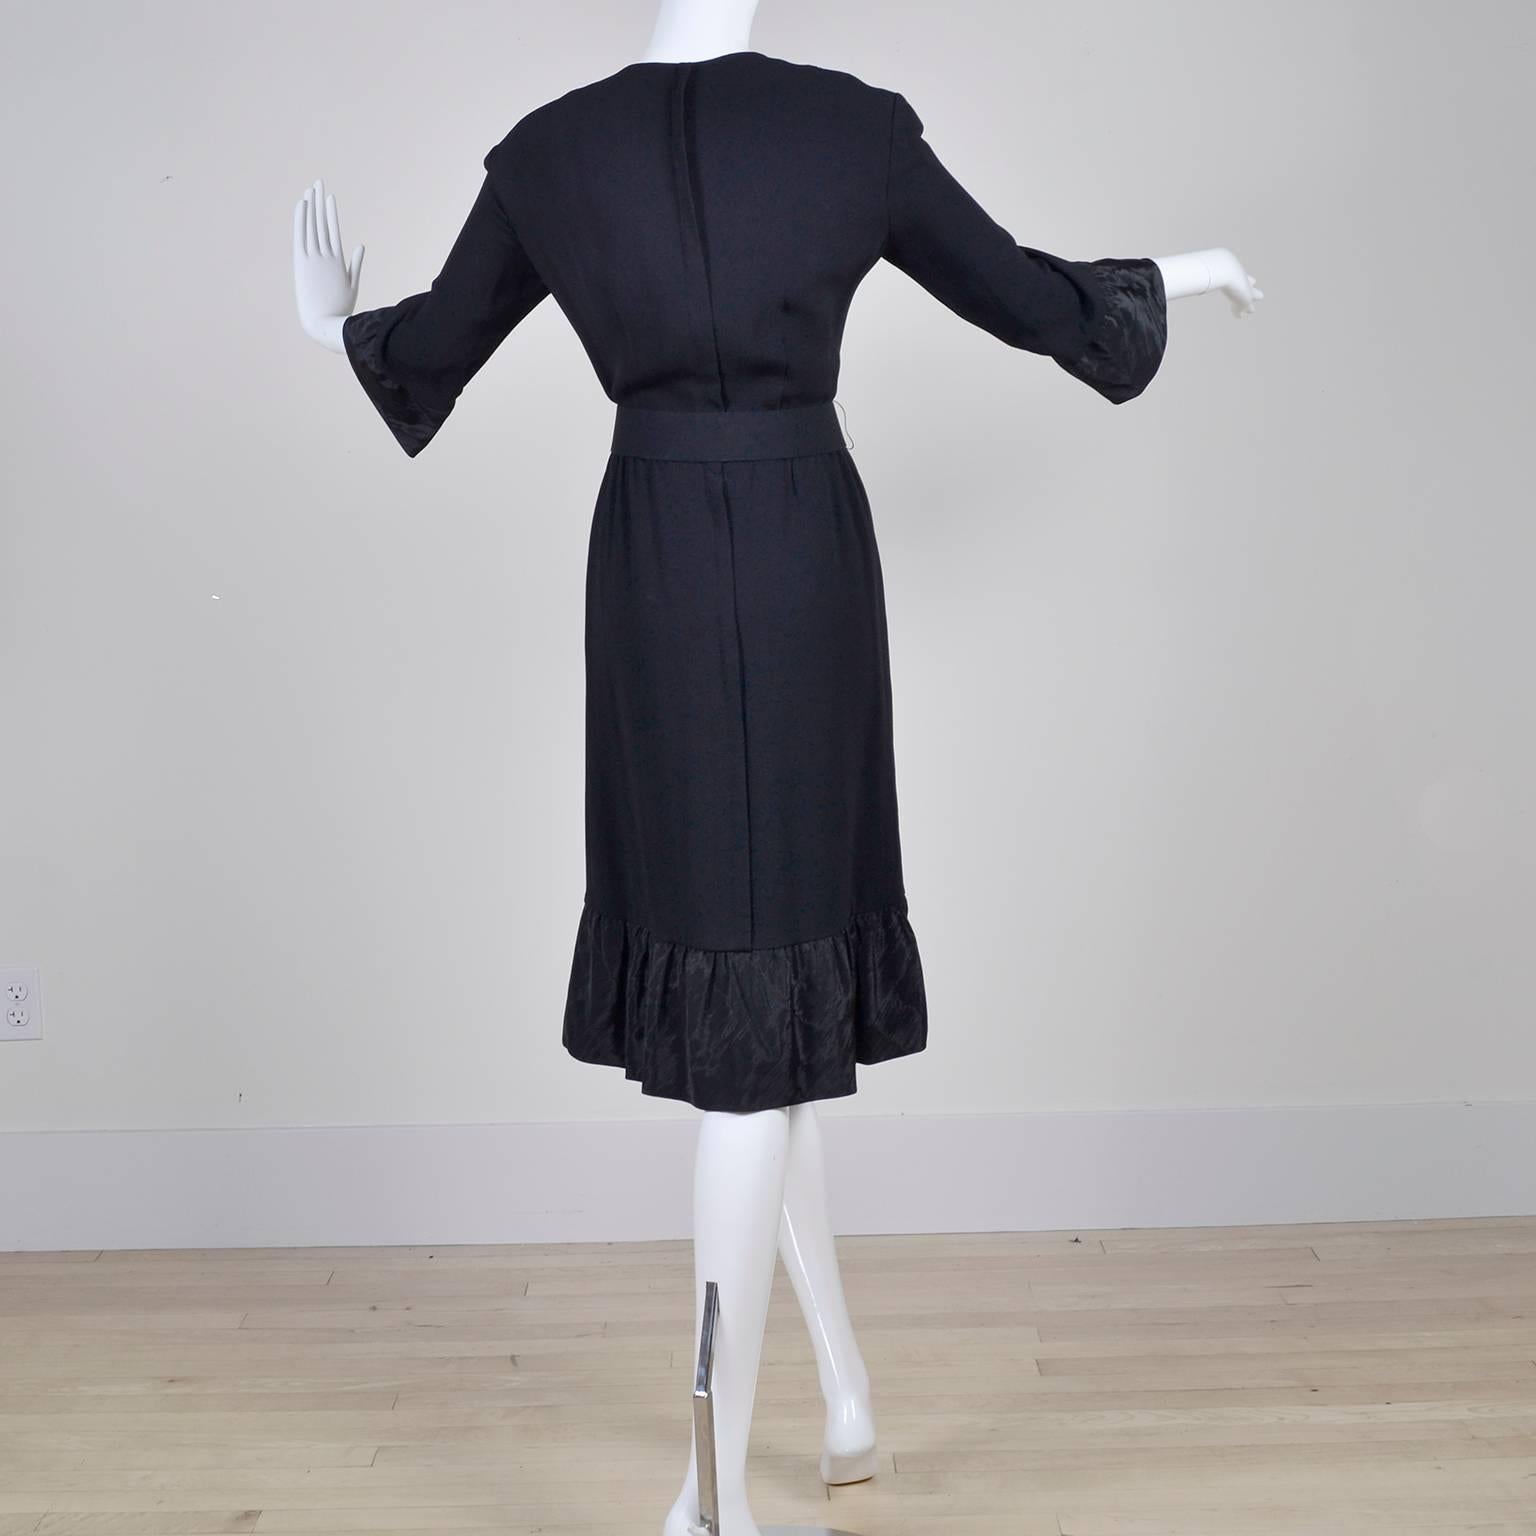 Pattullo-Jo Copeland Late 1960s Black Crepe Dress W Bow Belt and Taffeta Ruffles In Excellent Condition For Sale In Portland, OR